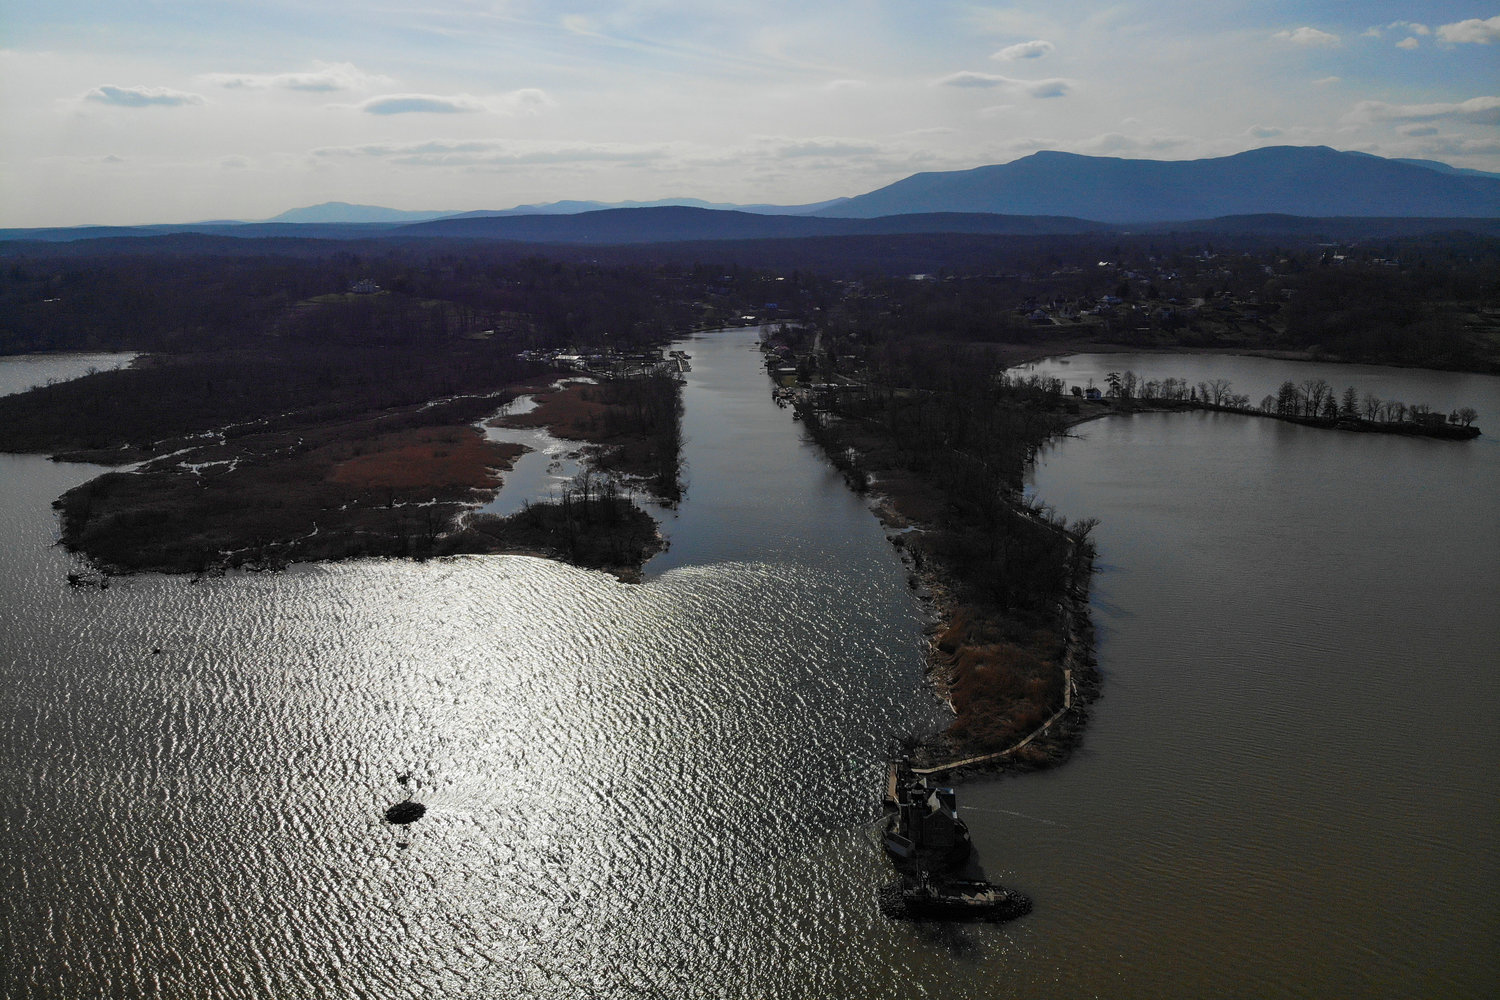 The Esopus Creek, center, empties out into the Hudson River in Saugerties, N.Y., Tuesday, April 5, 2022. As western regions contend with drier conditions, New York City is under fire for sometimes releasing hundreds of millions of gallons of water a day from the Ashokan reservoir in the Catskill Mountains. The occasional releases, often around storms, have been used to manage water the reservoir's  levels and to keep the water clear. But residents downstream say the periodic surges cause ecological harm along the lower Esopus Creek. (AP Photo/Seth Wenig)